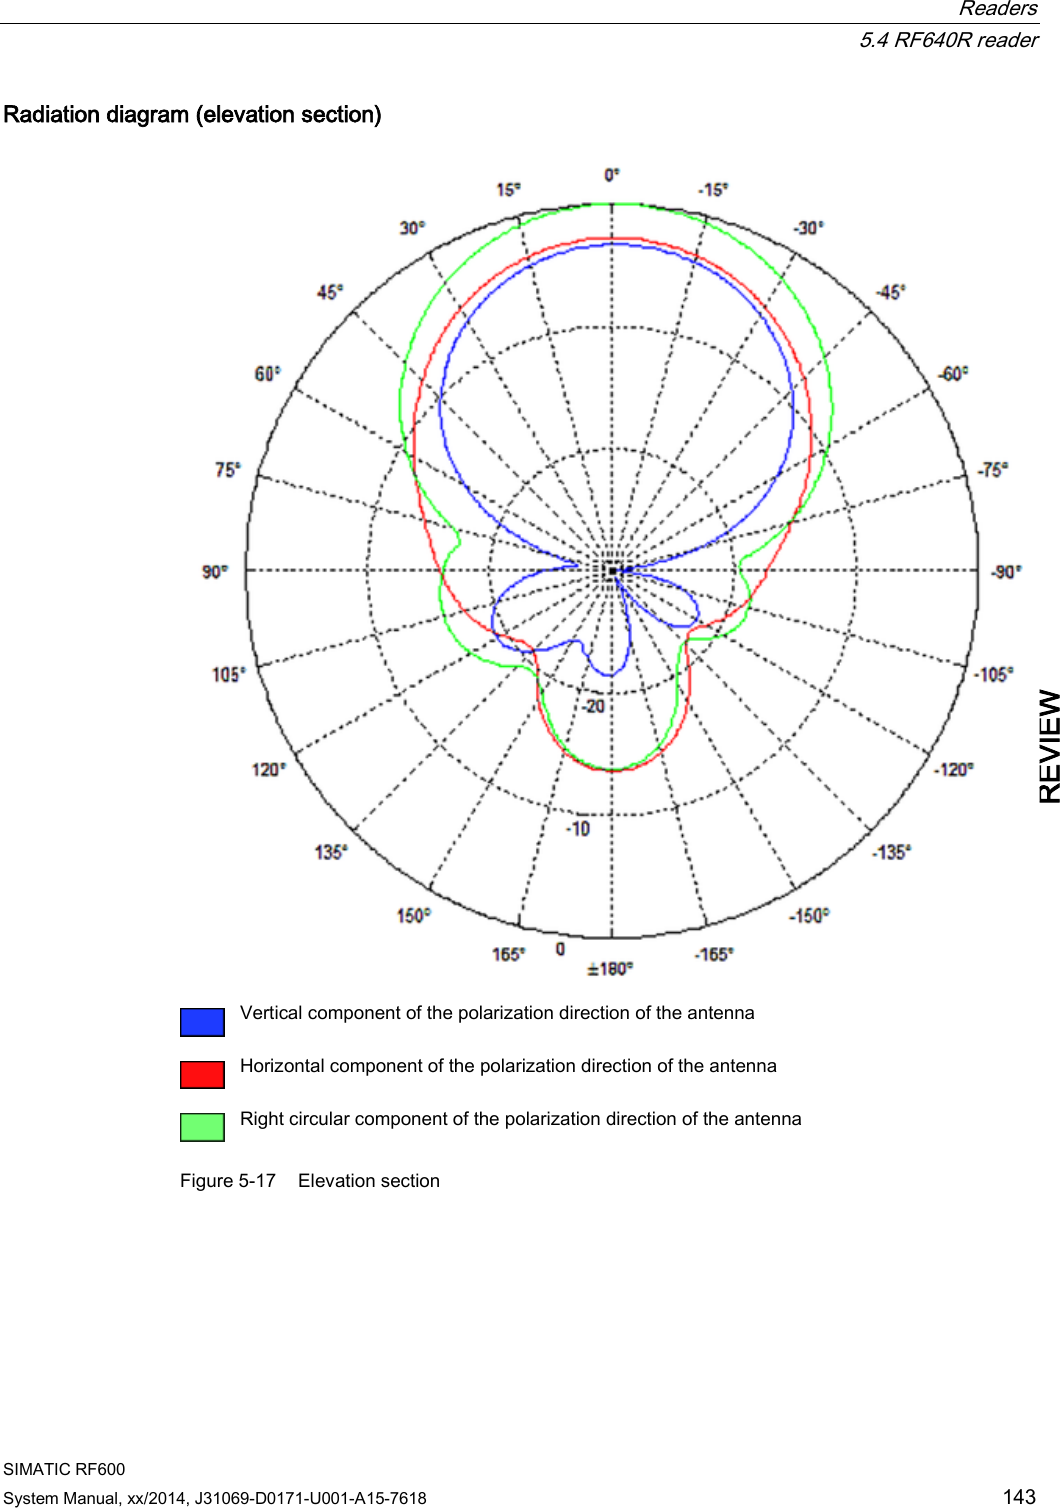  Readers  5.4 RF640R reader SIMATIC RF600 System Manual, xx/2014, J31069-D0171-U001-A15-7618 143 REVIEW Radiation diagram (elevation section)   Vertical component of the polarization direction of the antenna  Horizontal component of the polarization direction of the antenna  Right circular component of the polarization direction of the antenna Figure 5-17 Elevation section 